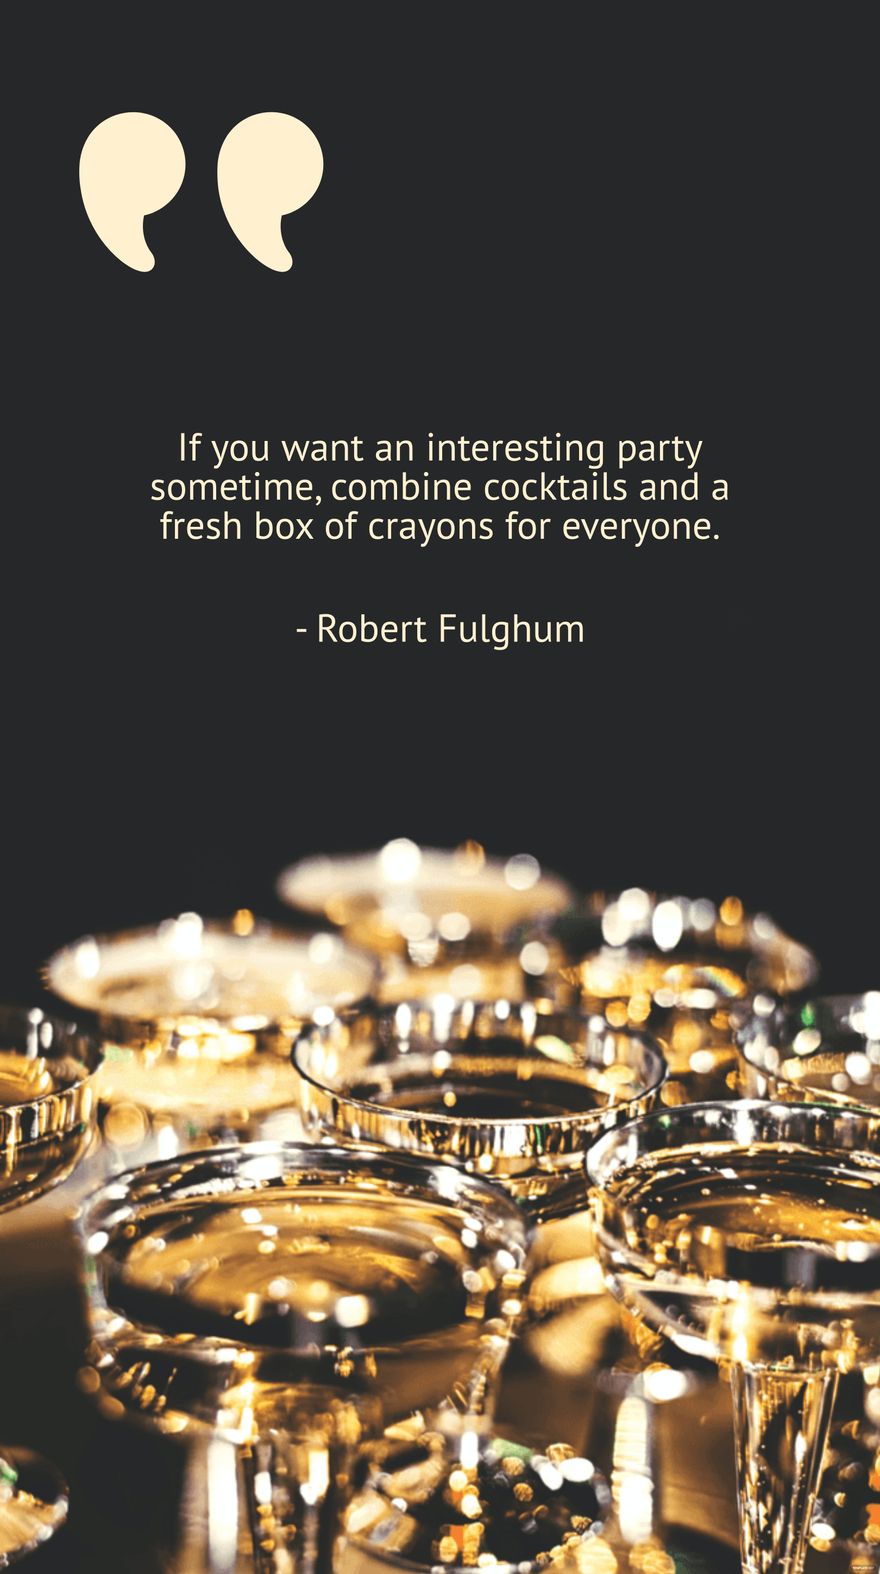 If you want an interesting party sometime, combine cocktails and a fresh box of crayons for everyone.